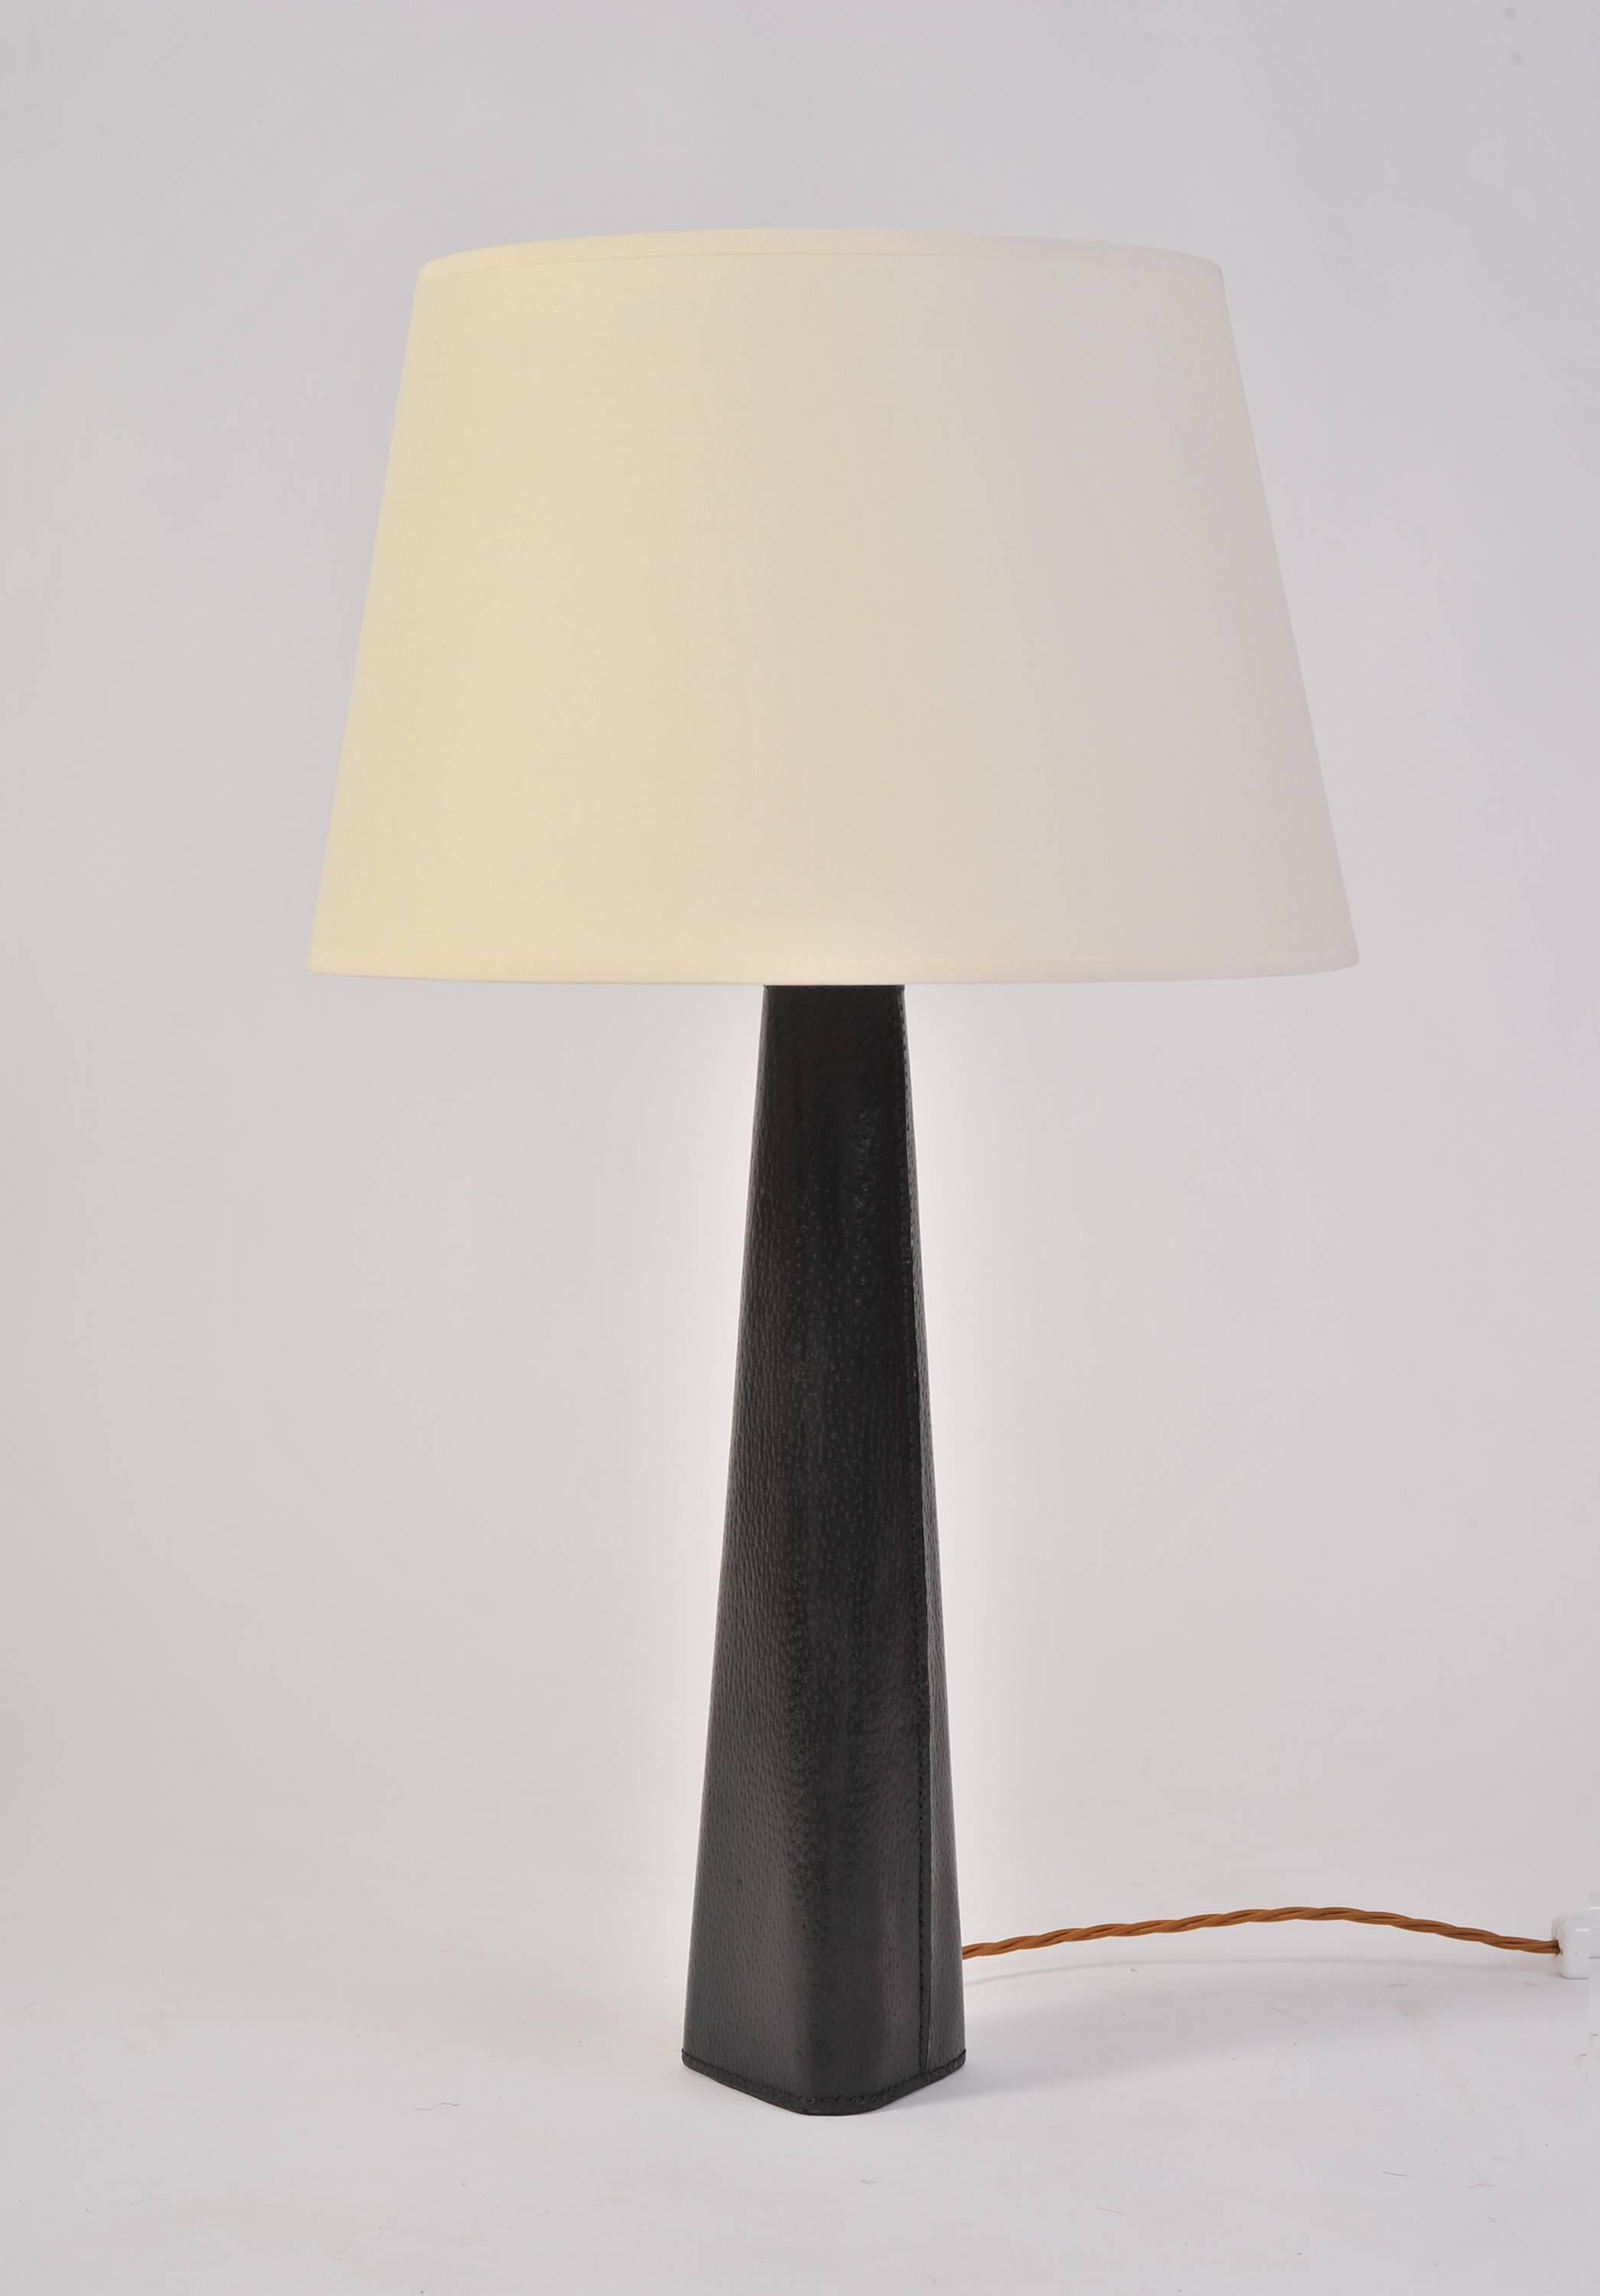 A pair of black stitched leather table lamps,
France, circa 1950.